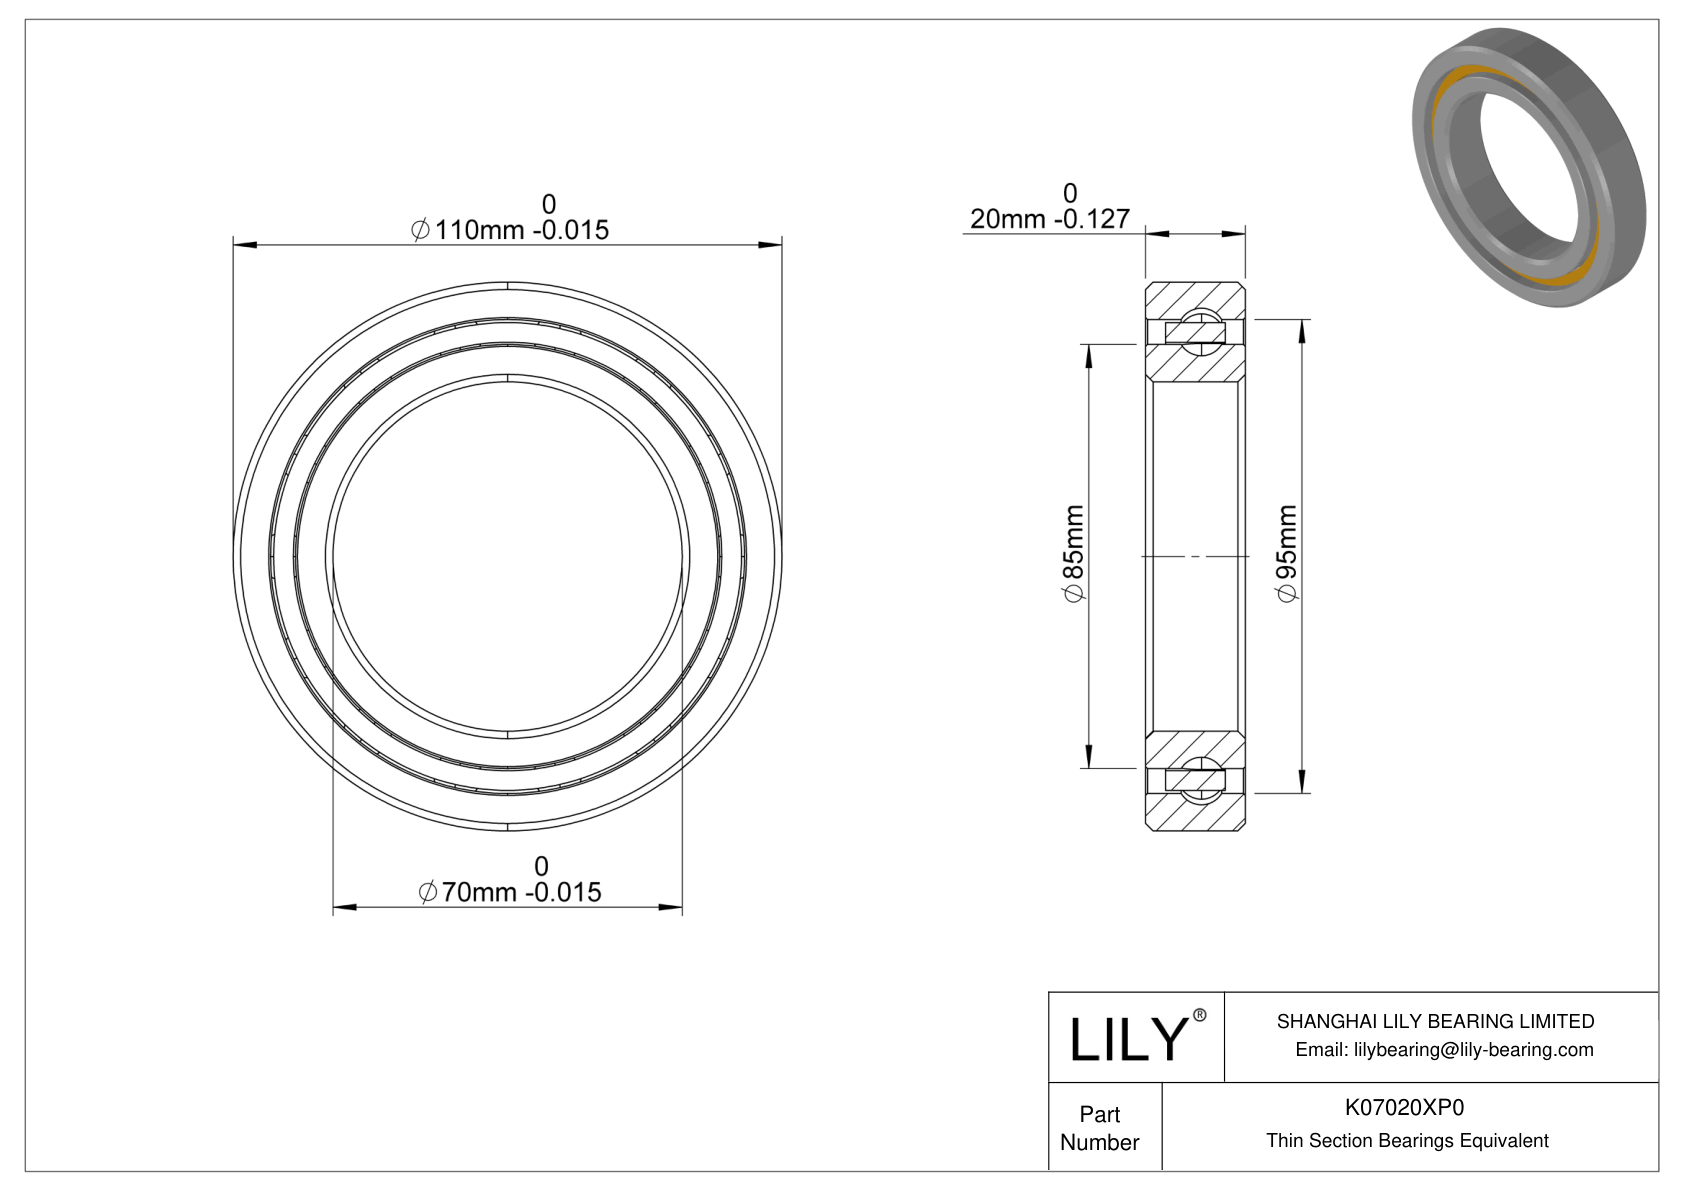 K07020XP0 Constant Section (CS) Bearings cad drawing